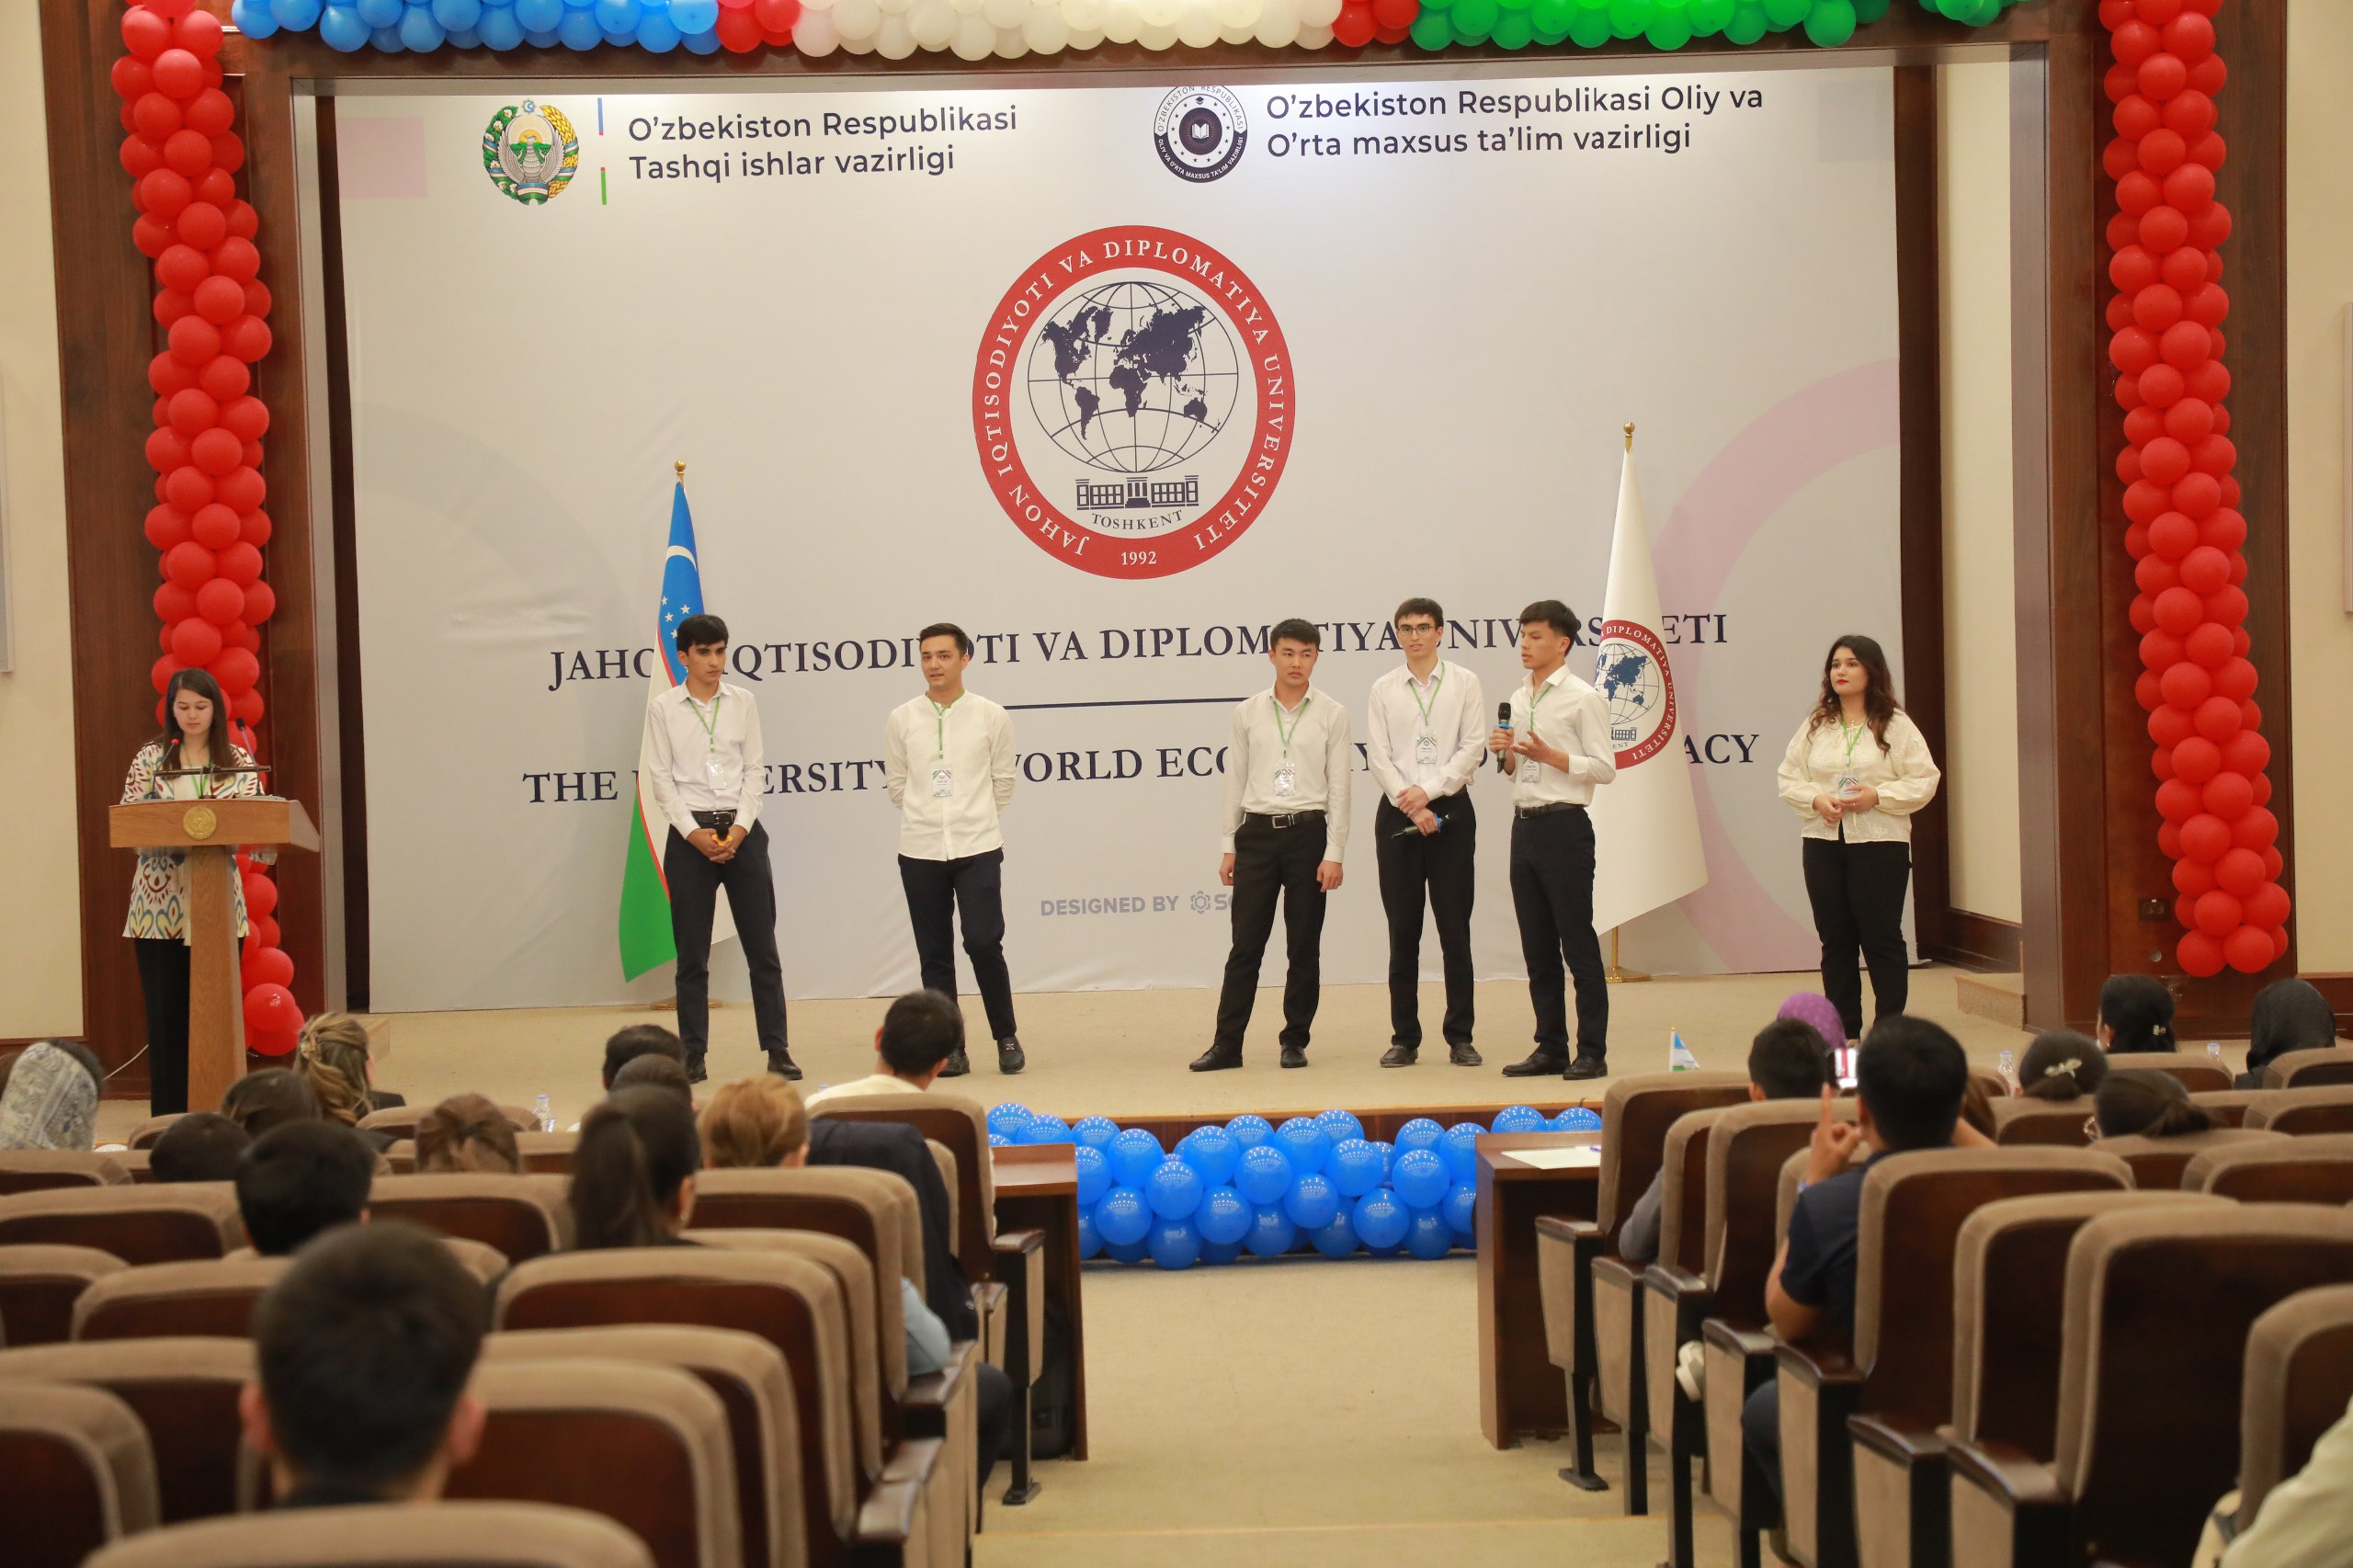 An oratory competition in Persian was held at the University of World Economy and Diplomacy